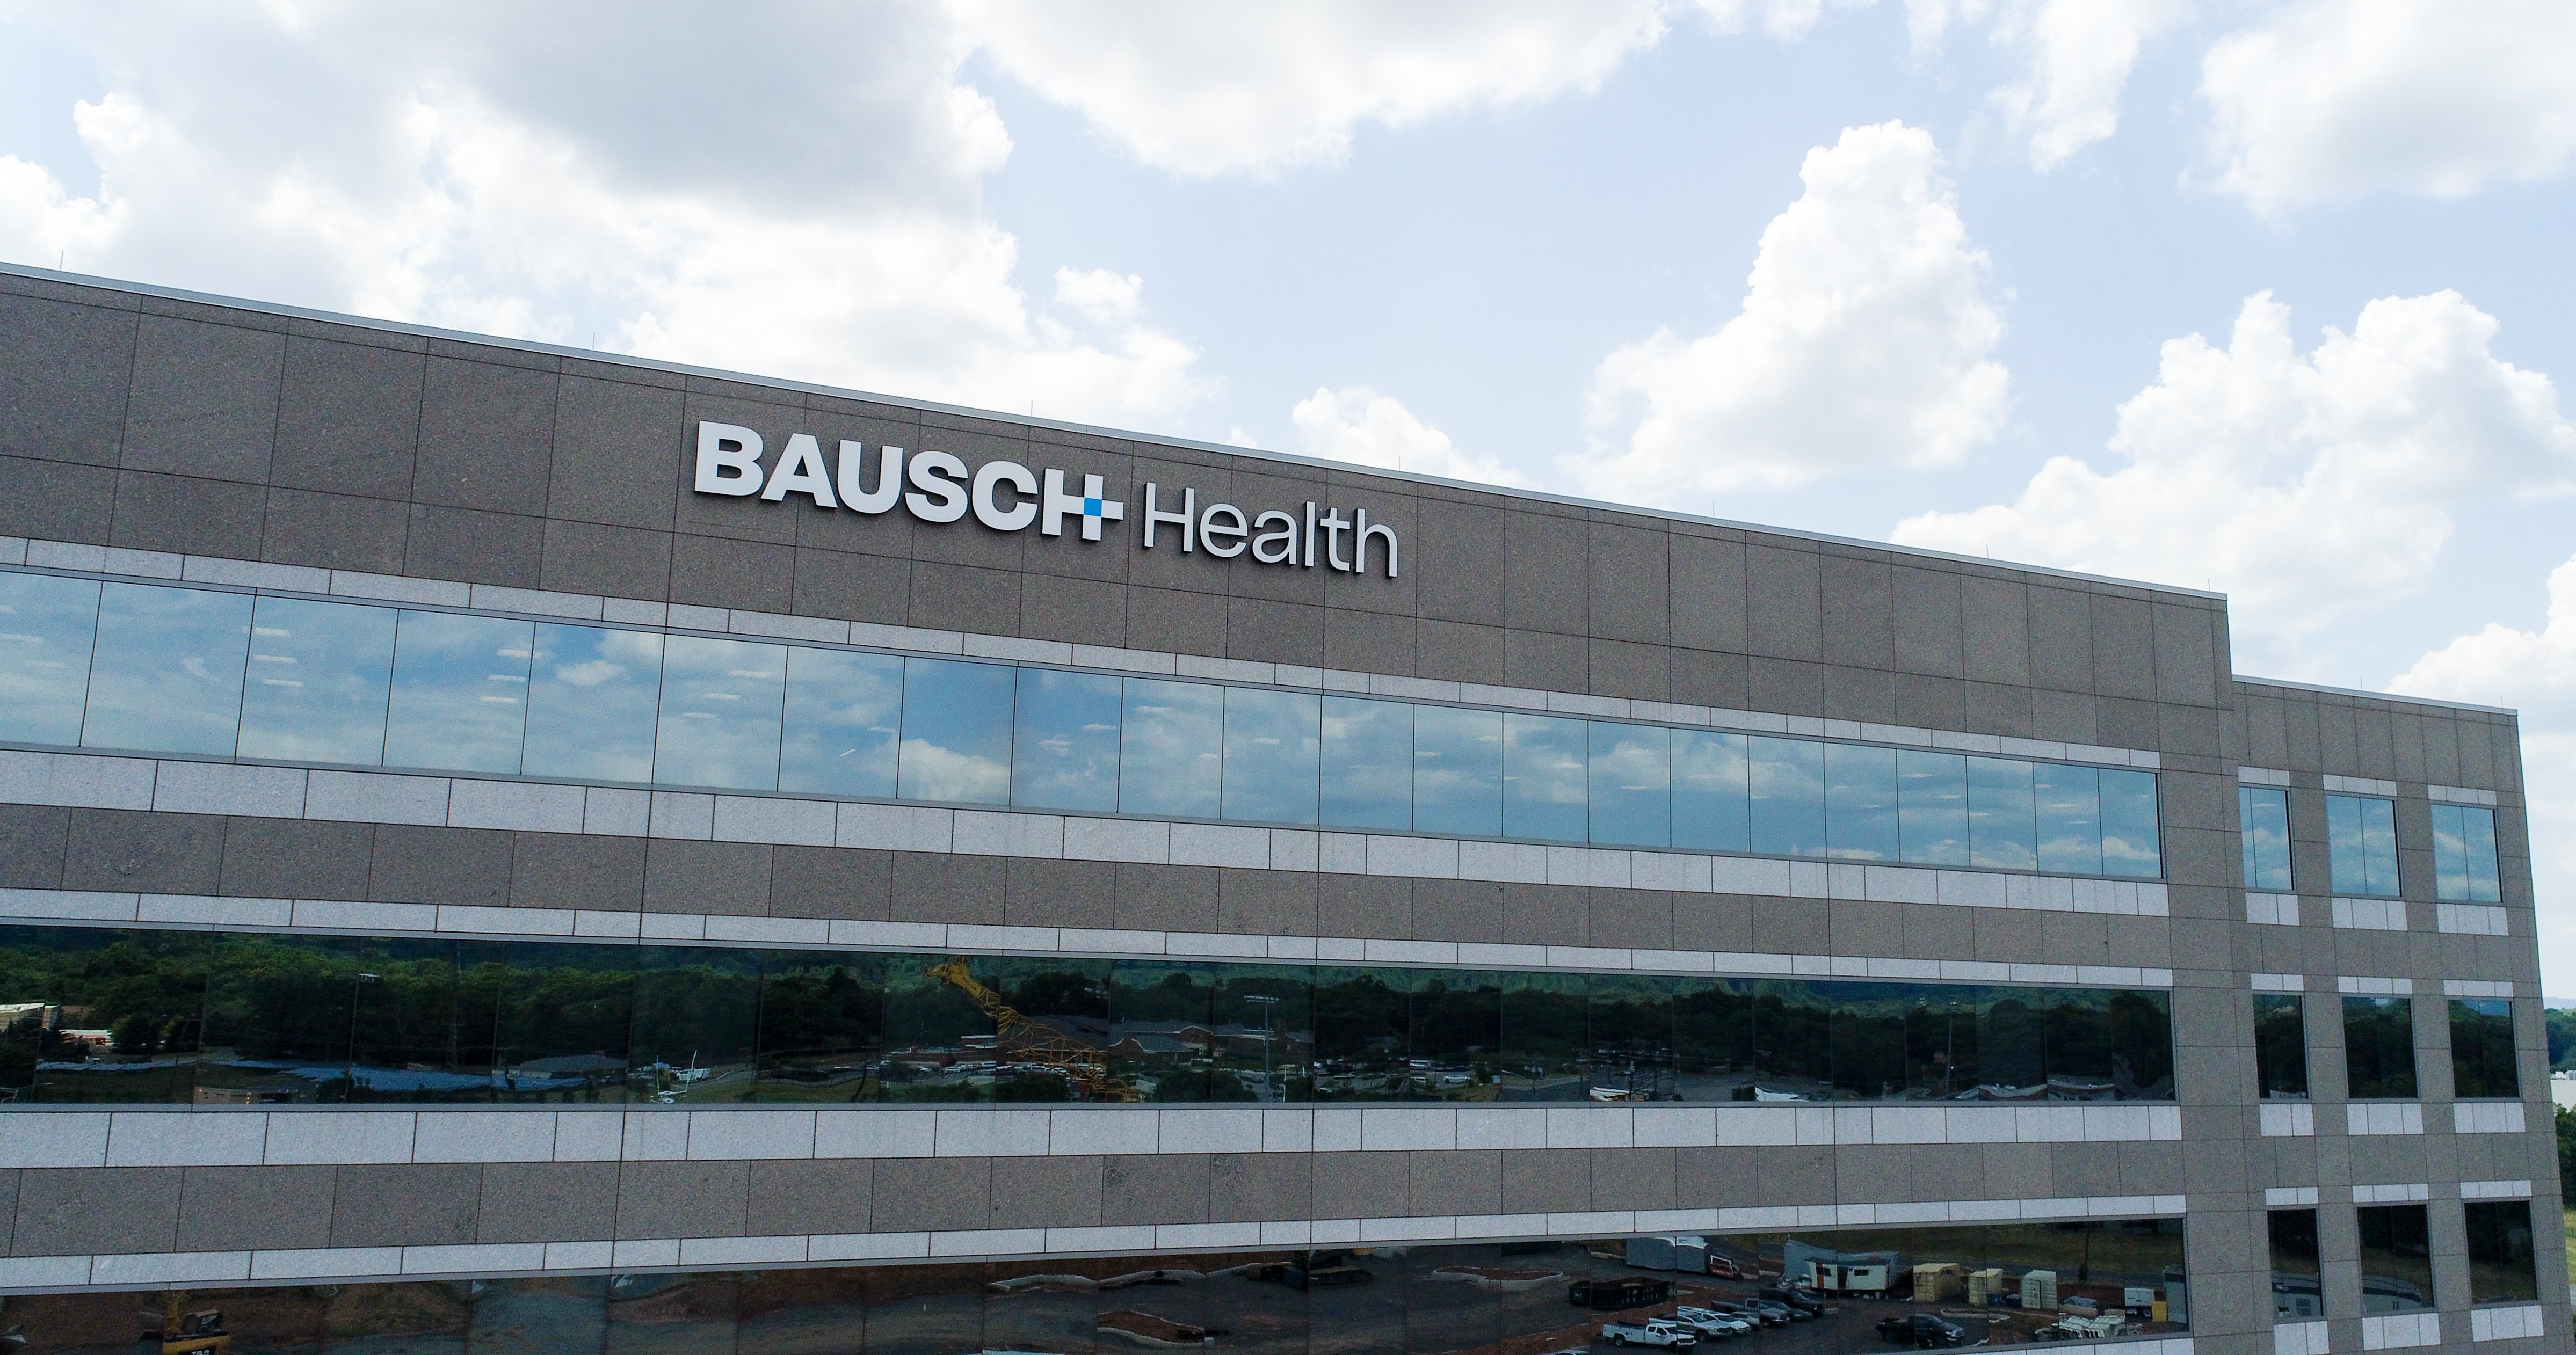 Bausch Health headquarters formerly Valeant